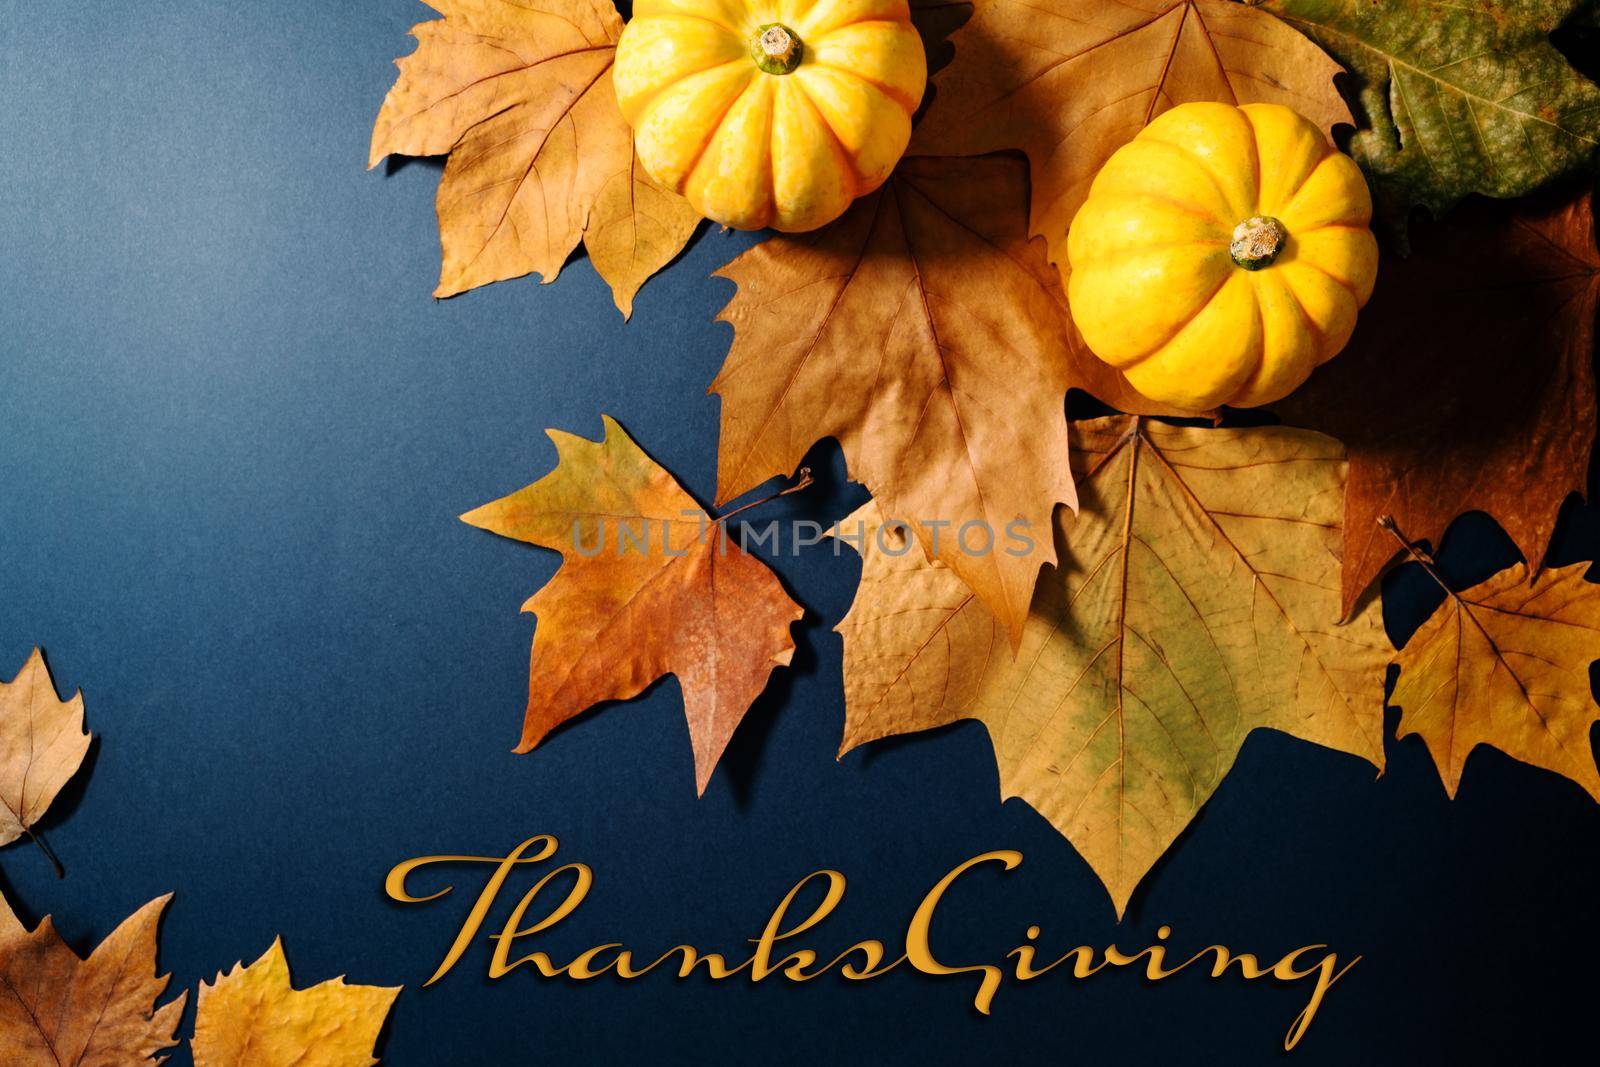 Happy Thanksgiving Day with maple leaves and pumpkin on blue background